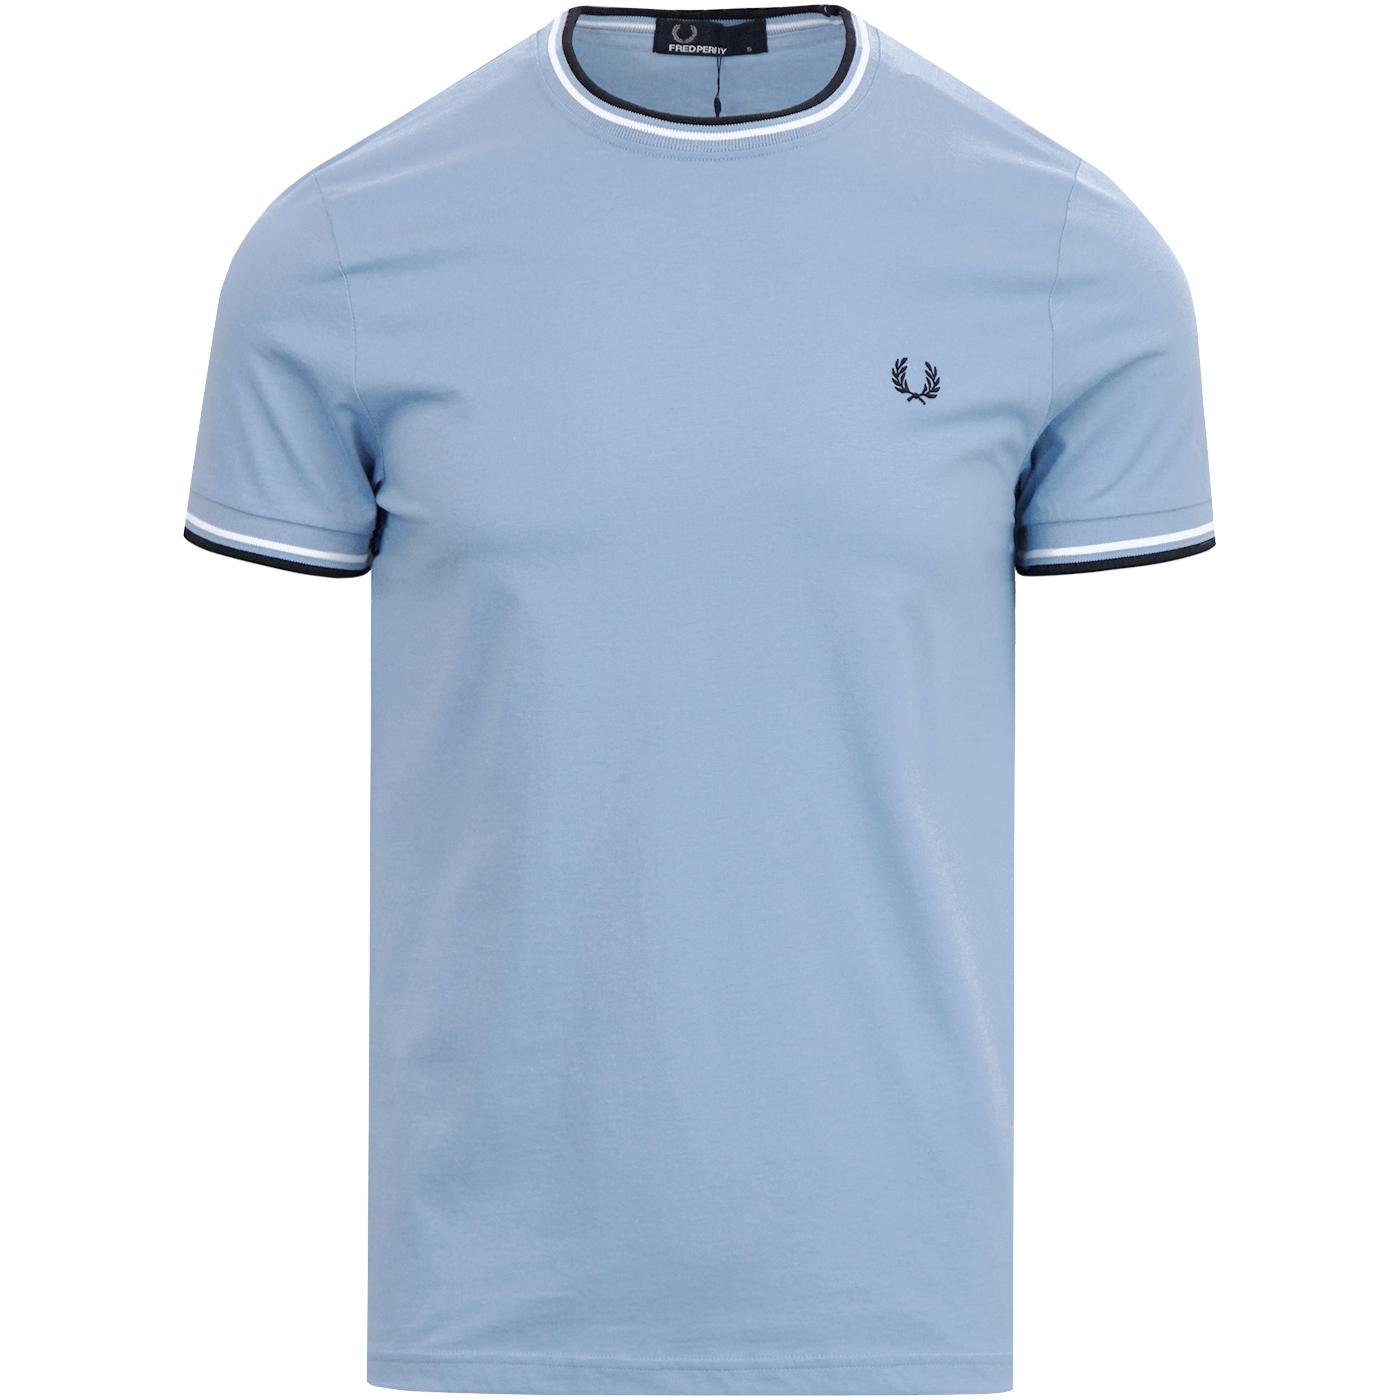 FRED PERRY Retro Mod Twin Tipped Crew T-Shirt S/W